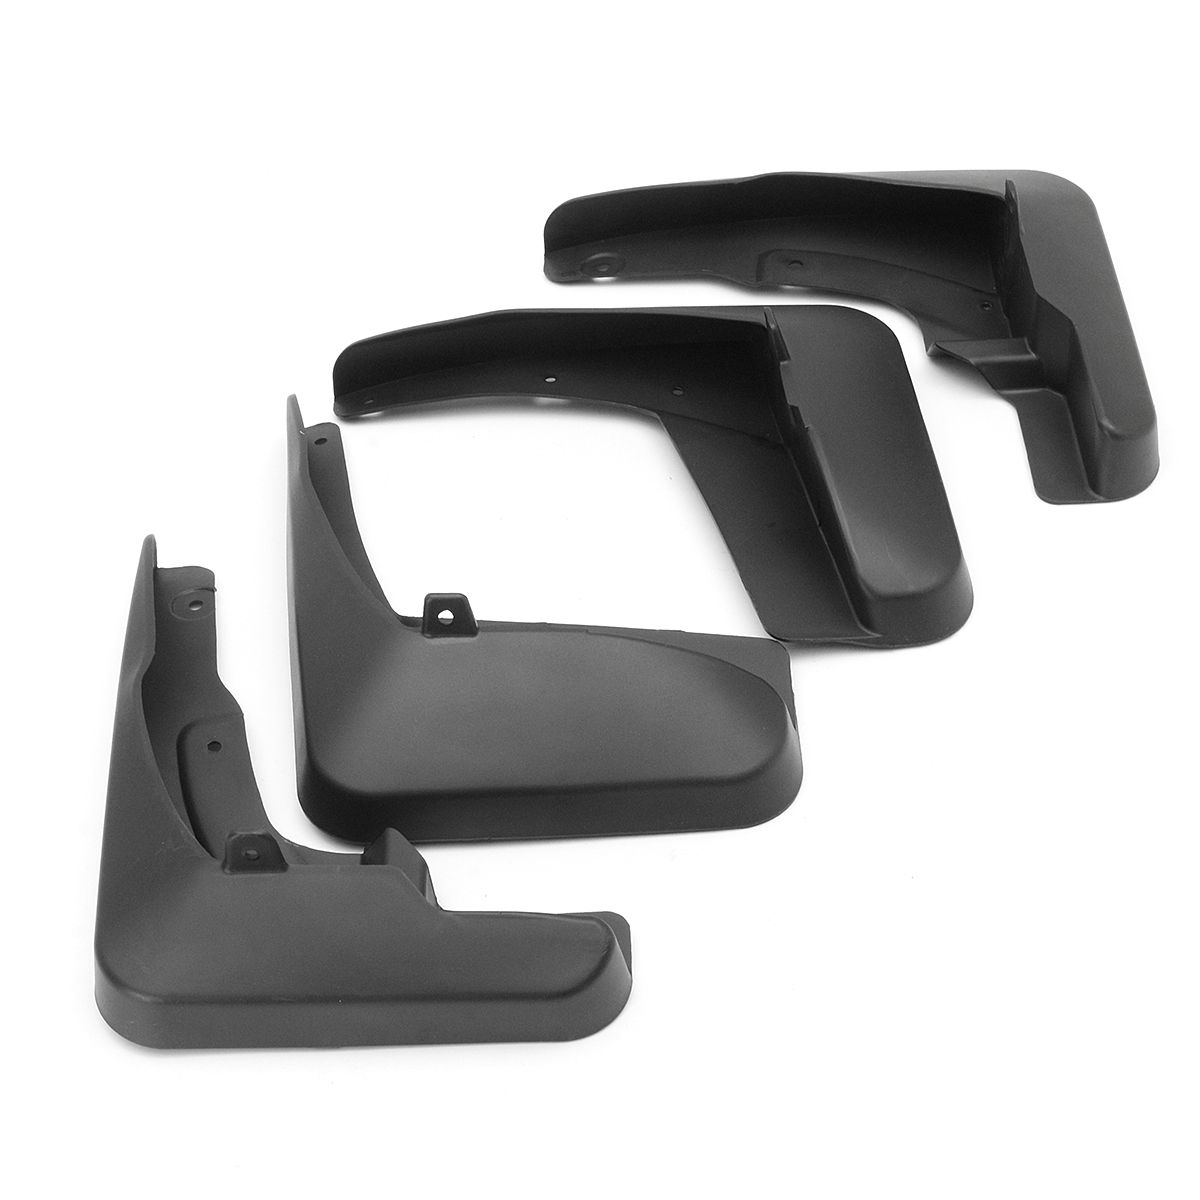 Mud-Flaps-Splash-Mud-Guards-Front-Rear-Fender-For-TOYOTA-VENZA-Mud-Flaps-2009-2016-1155715